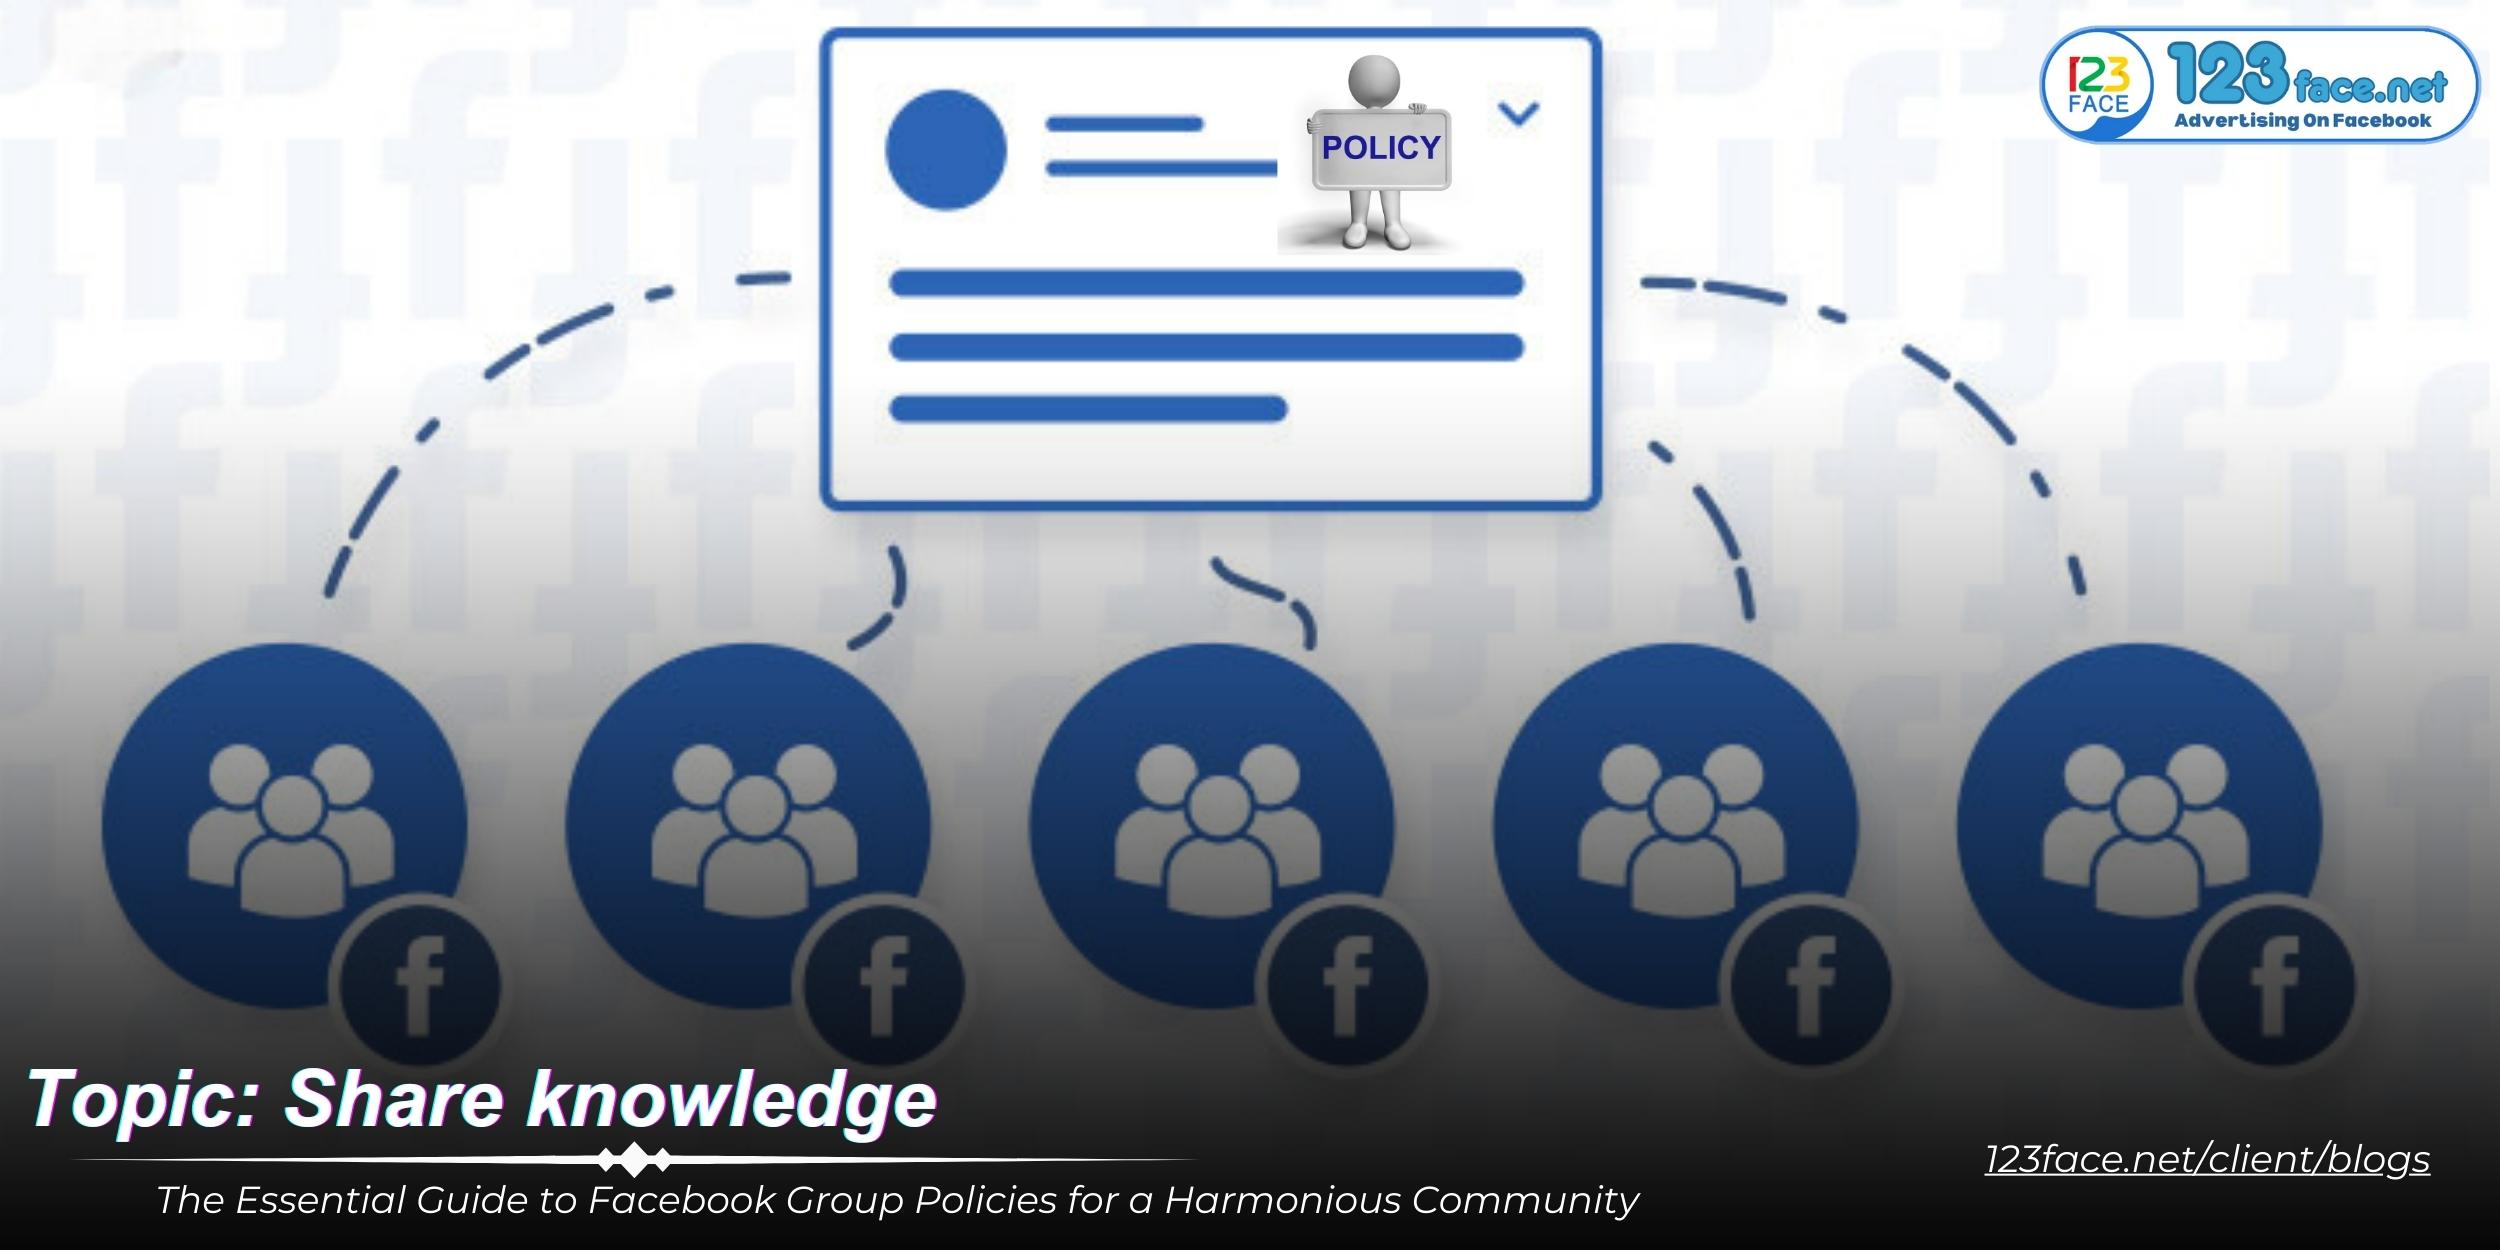 The Essential Guide to Facebook Group Policies for a Harmonious Community